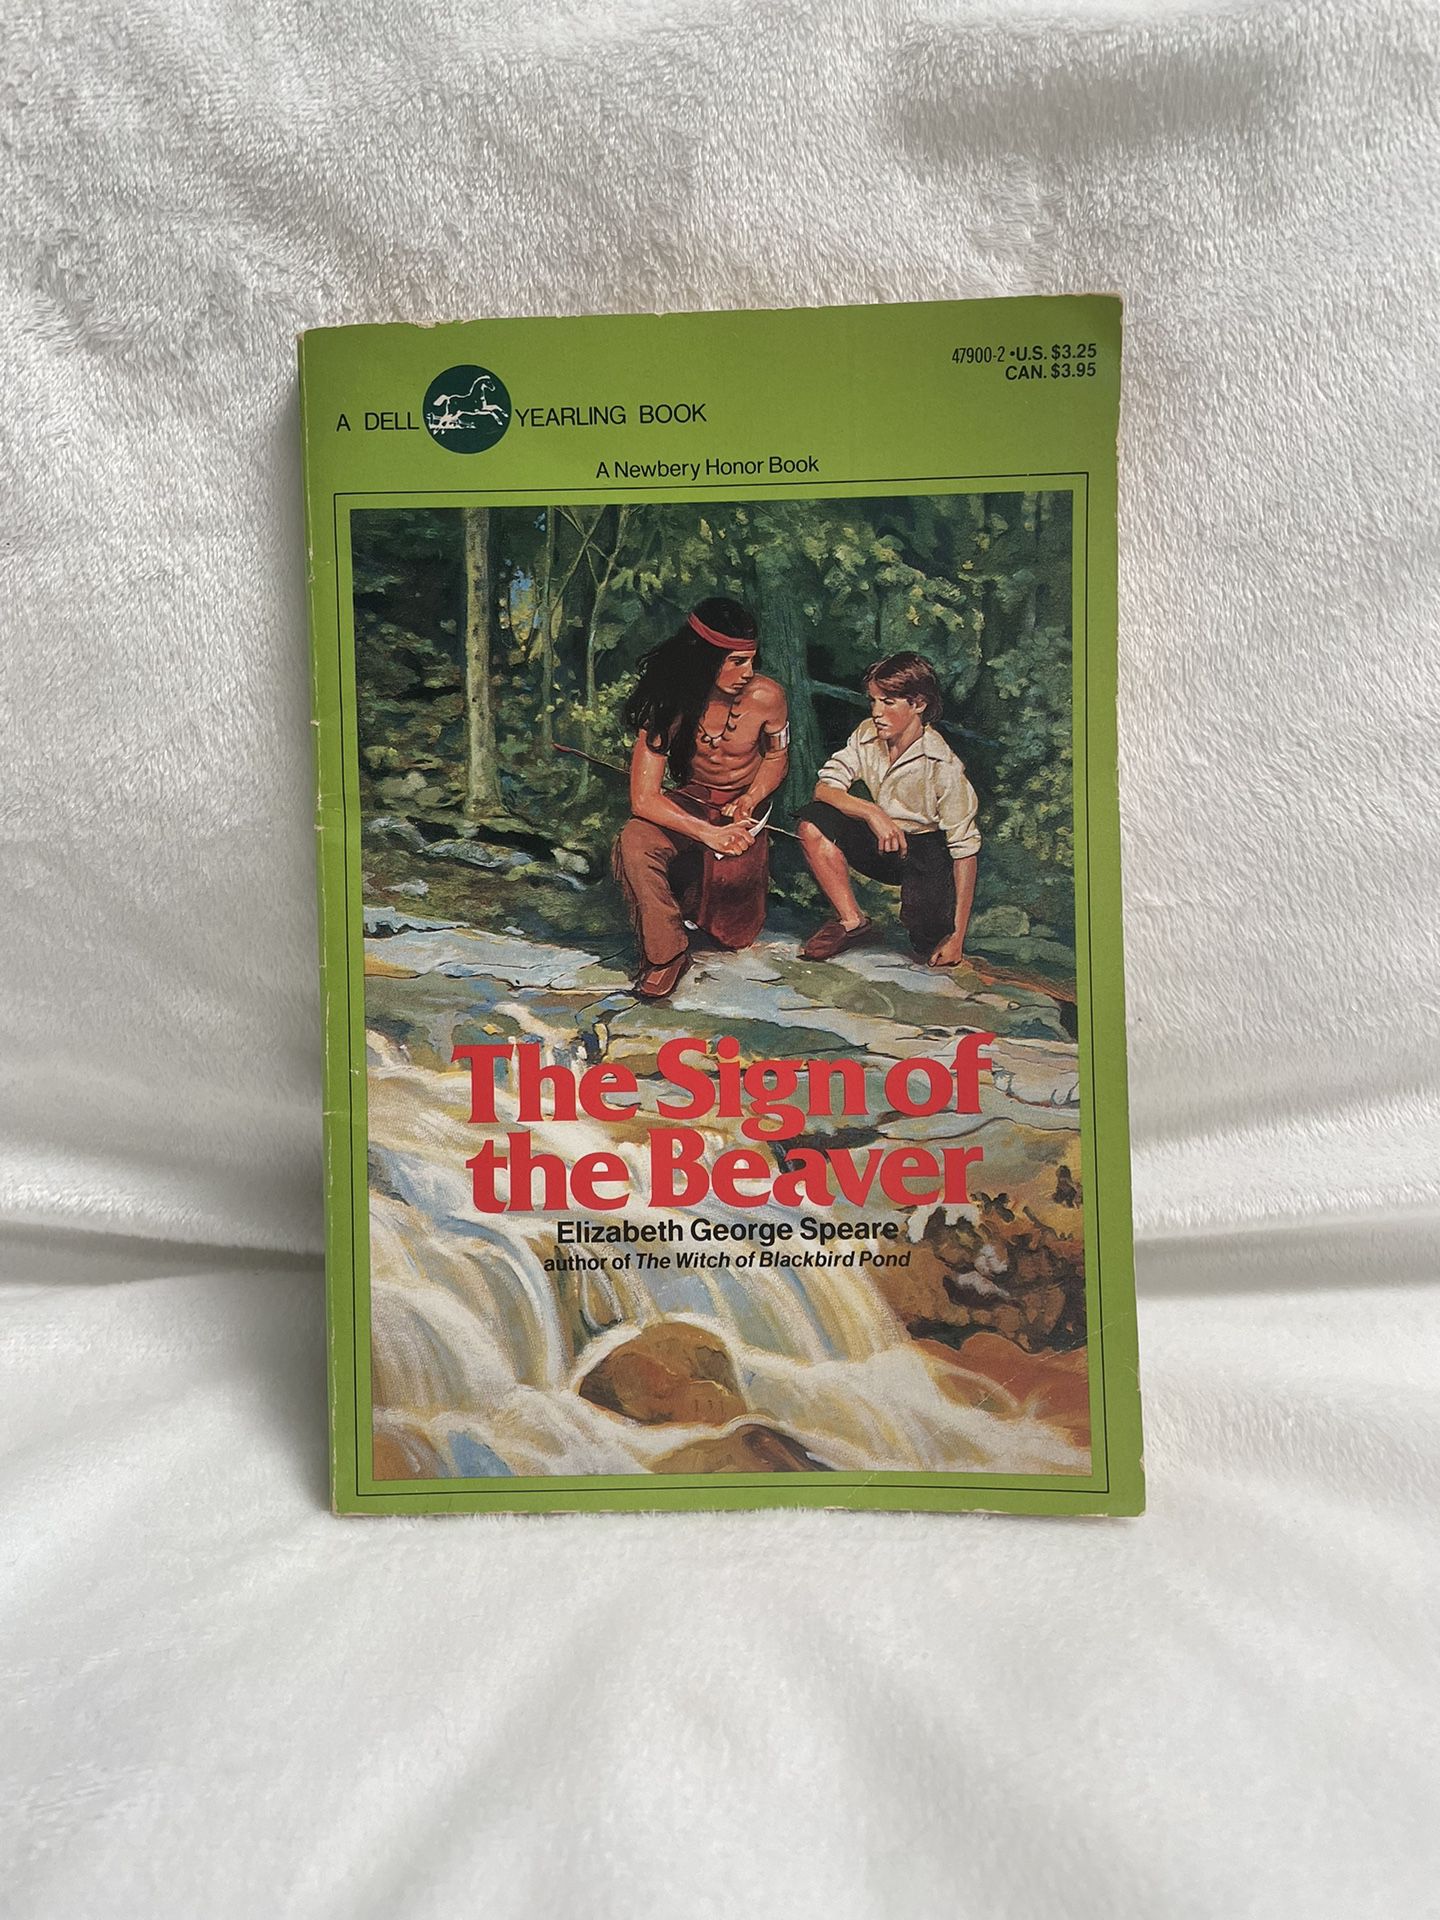 Beaver　OfferUp　Paperback)　The　Woodland,　Sale　the　for　Sign　in　Trade　of　(1984,　CA